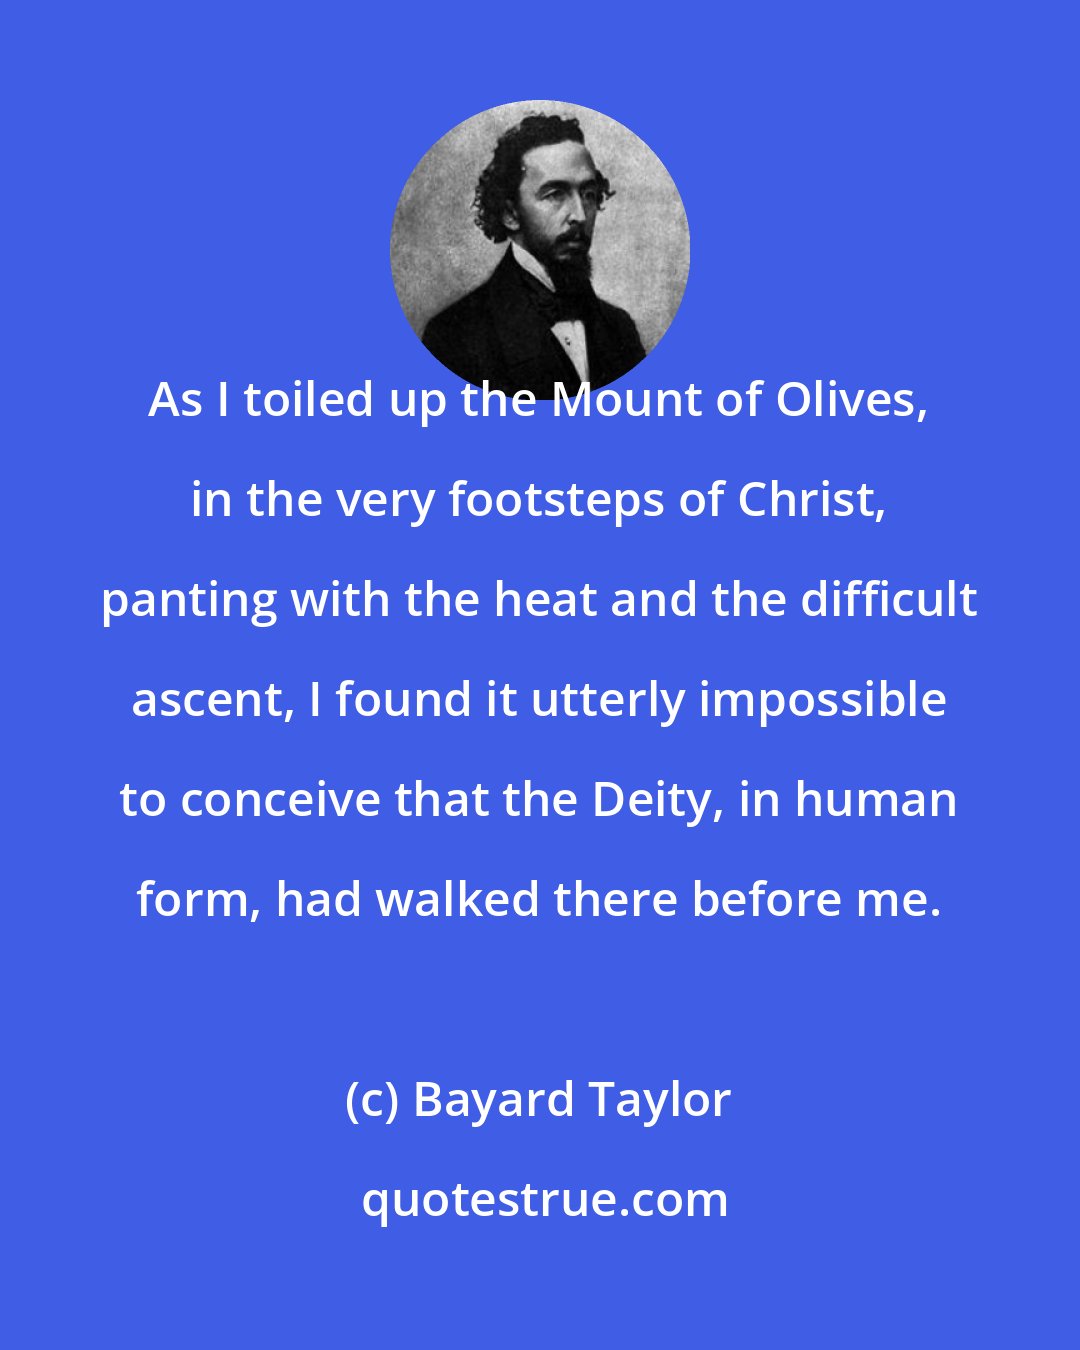 Bayard Taylor: As I toiled up the Mount of Olives, in the very footsteps of Christ, panting with the heat and the difficult ascent, I found it utterly impossible to conceive that the Deity, in human form, had walked there before me.